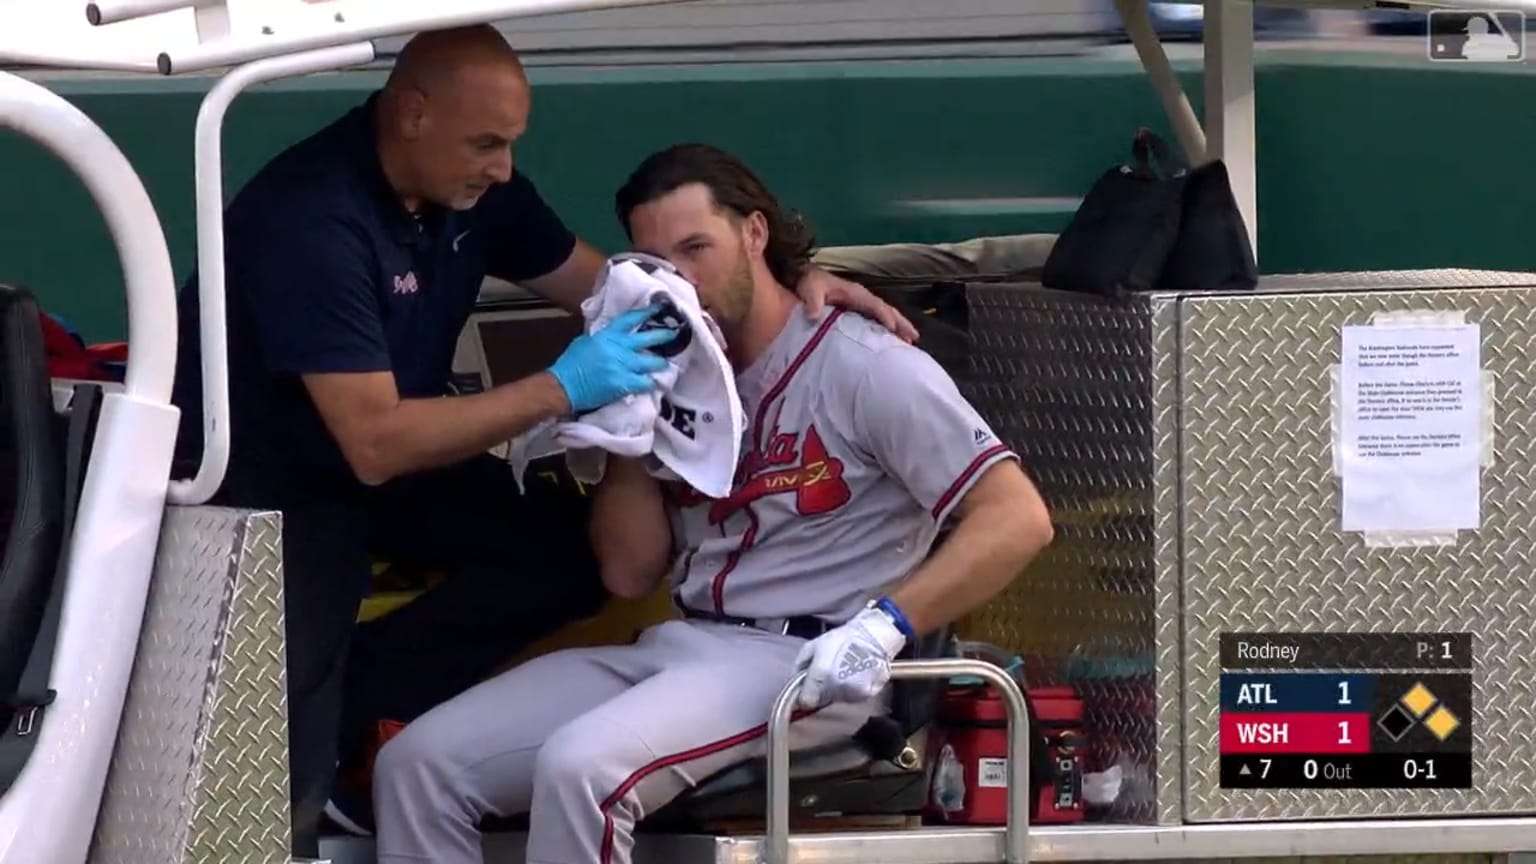 Braves' Charlie Culberson hit in face by pitch